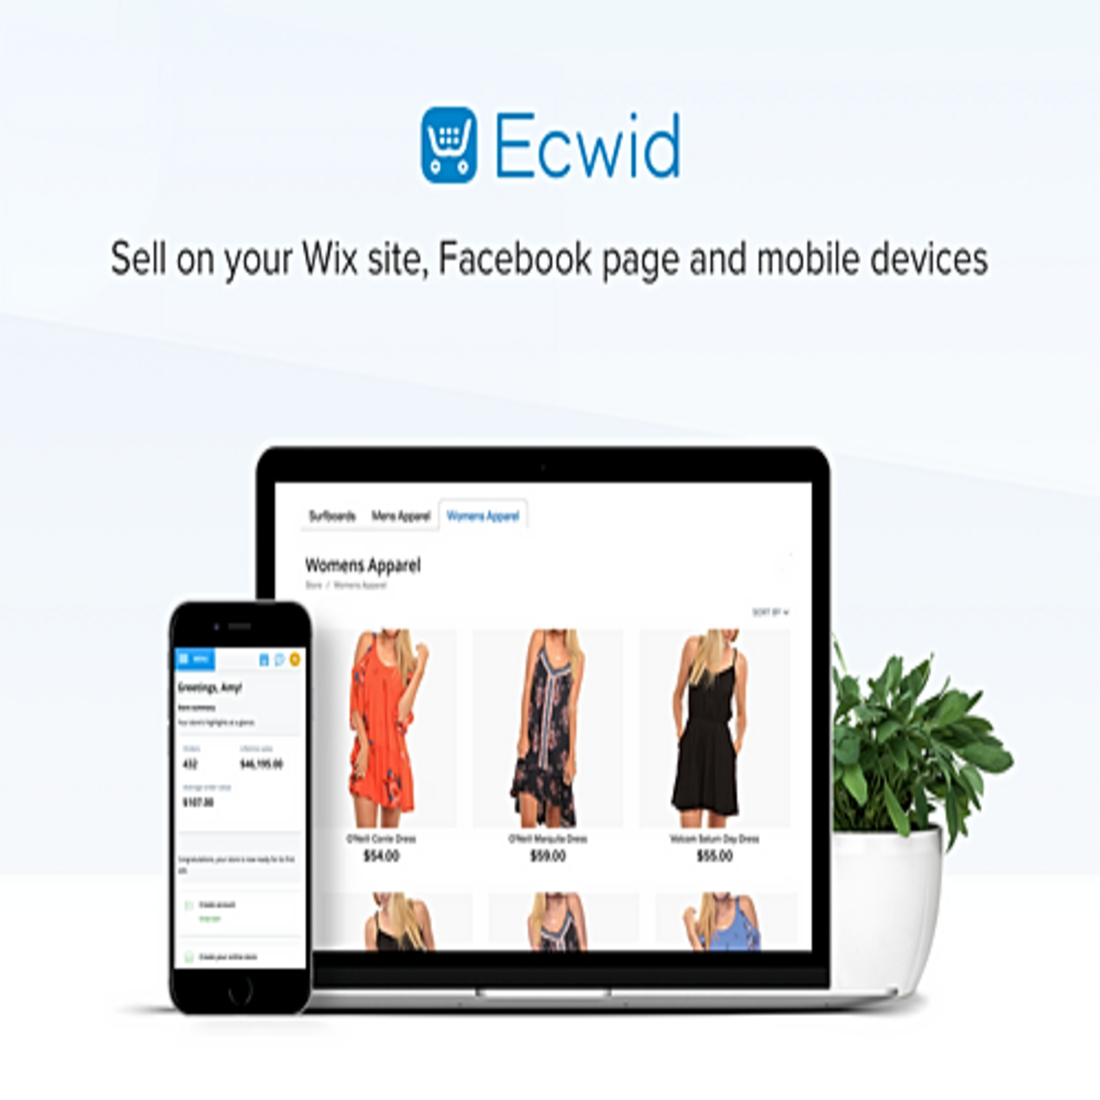 Ecwid - Best Wix App for eCommerce